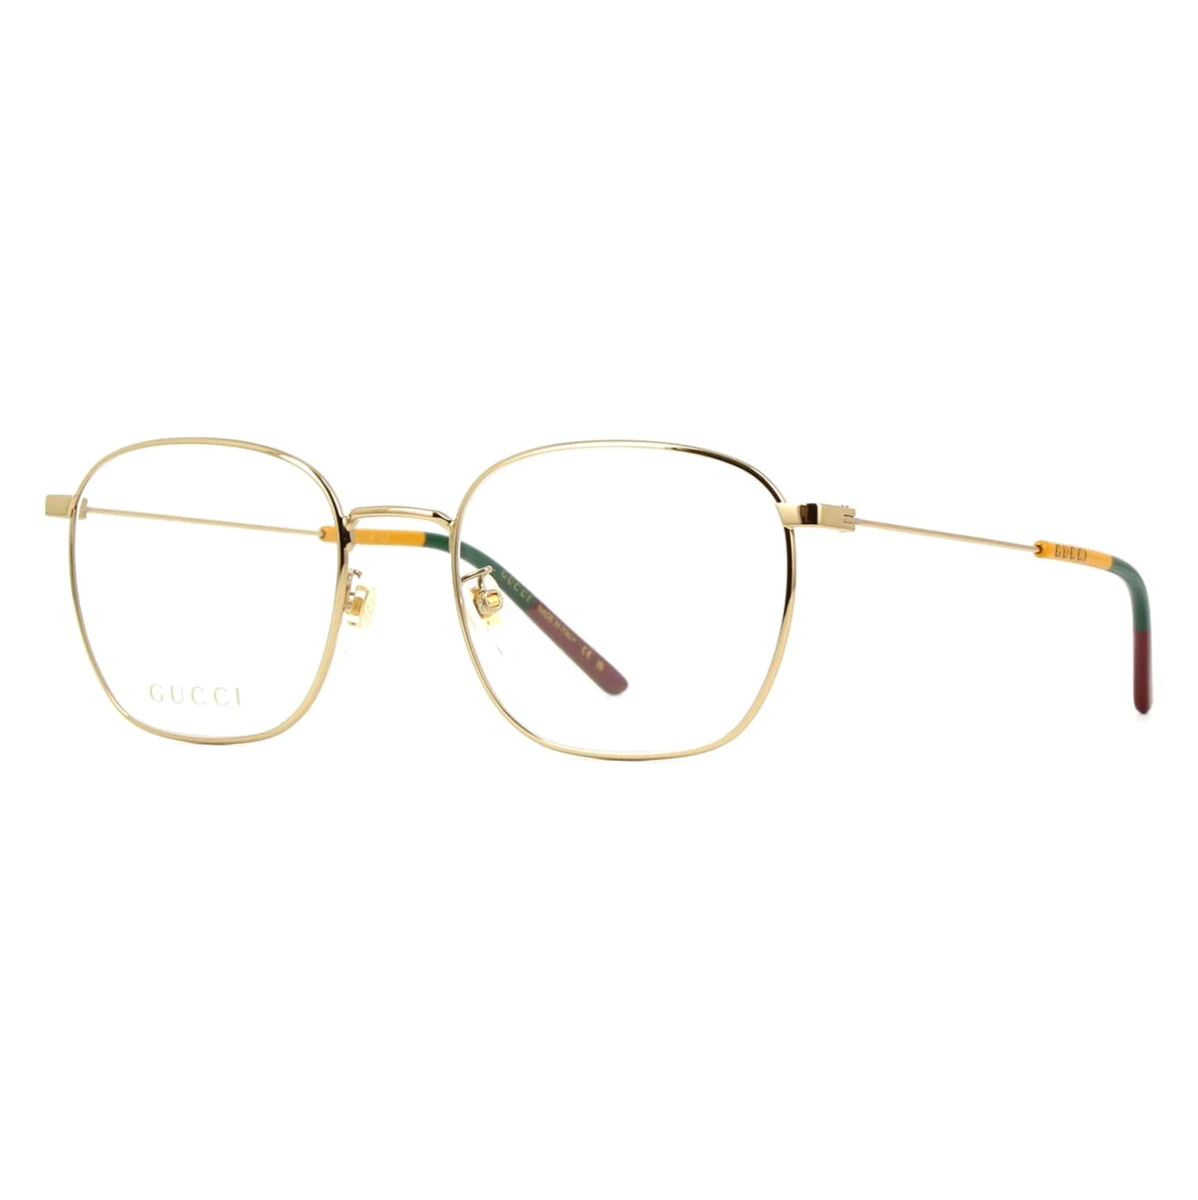  "Gucci 0681O Optical Frames - Model 0681O, offering style and quality."